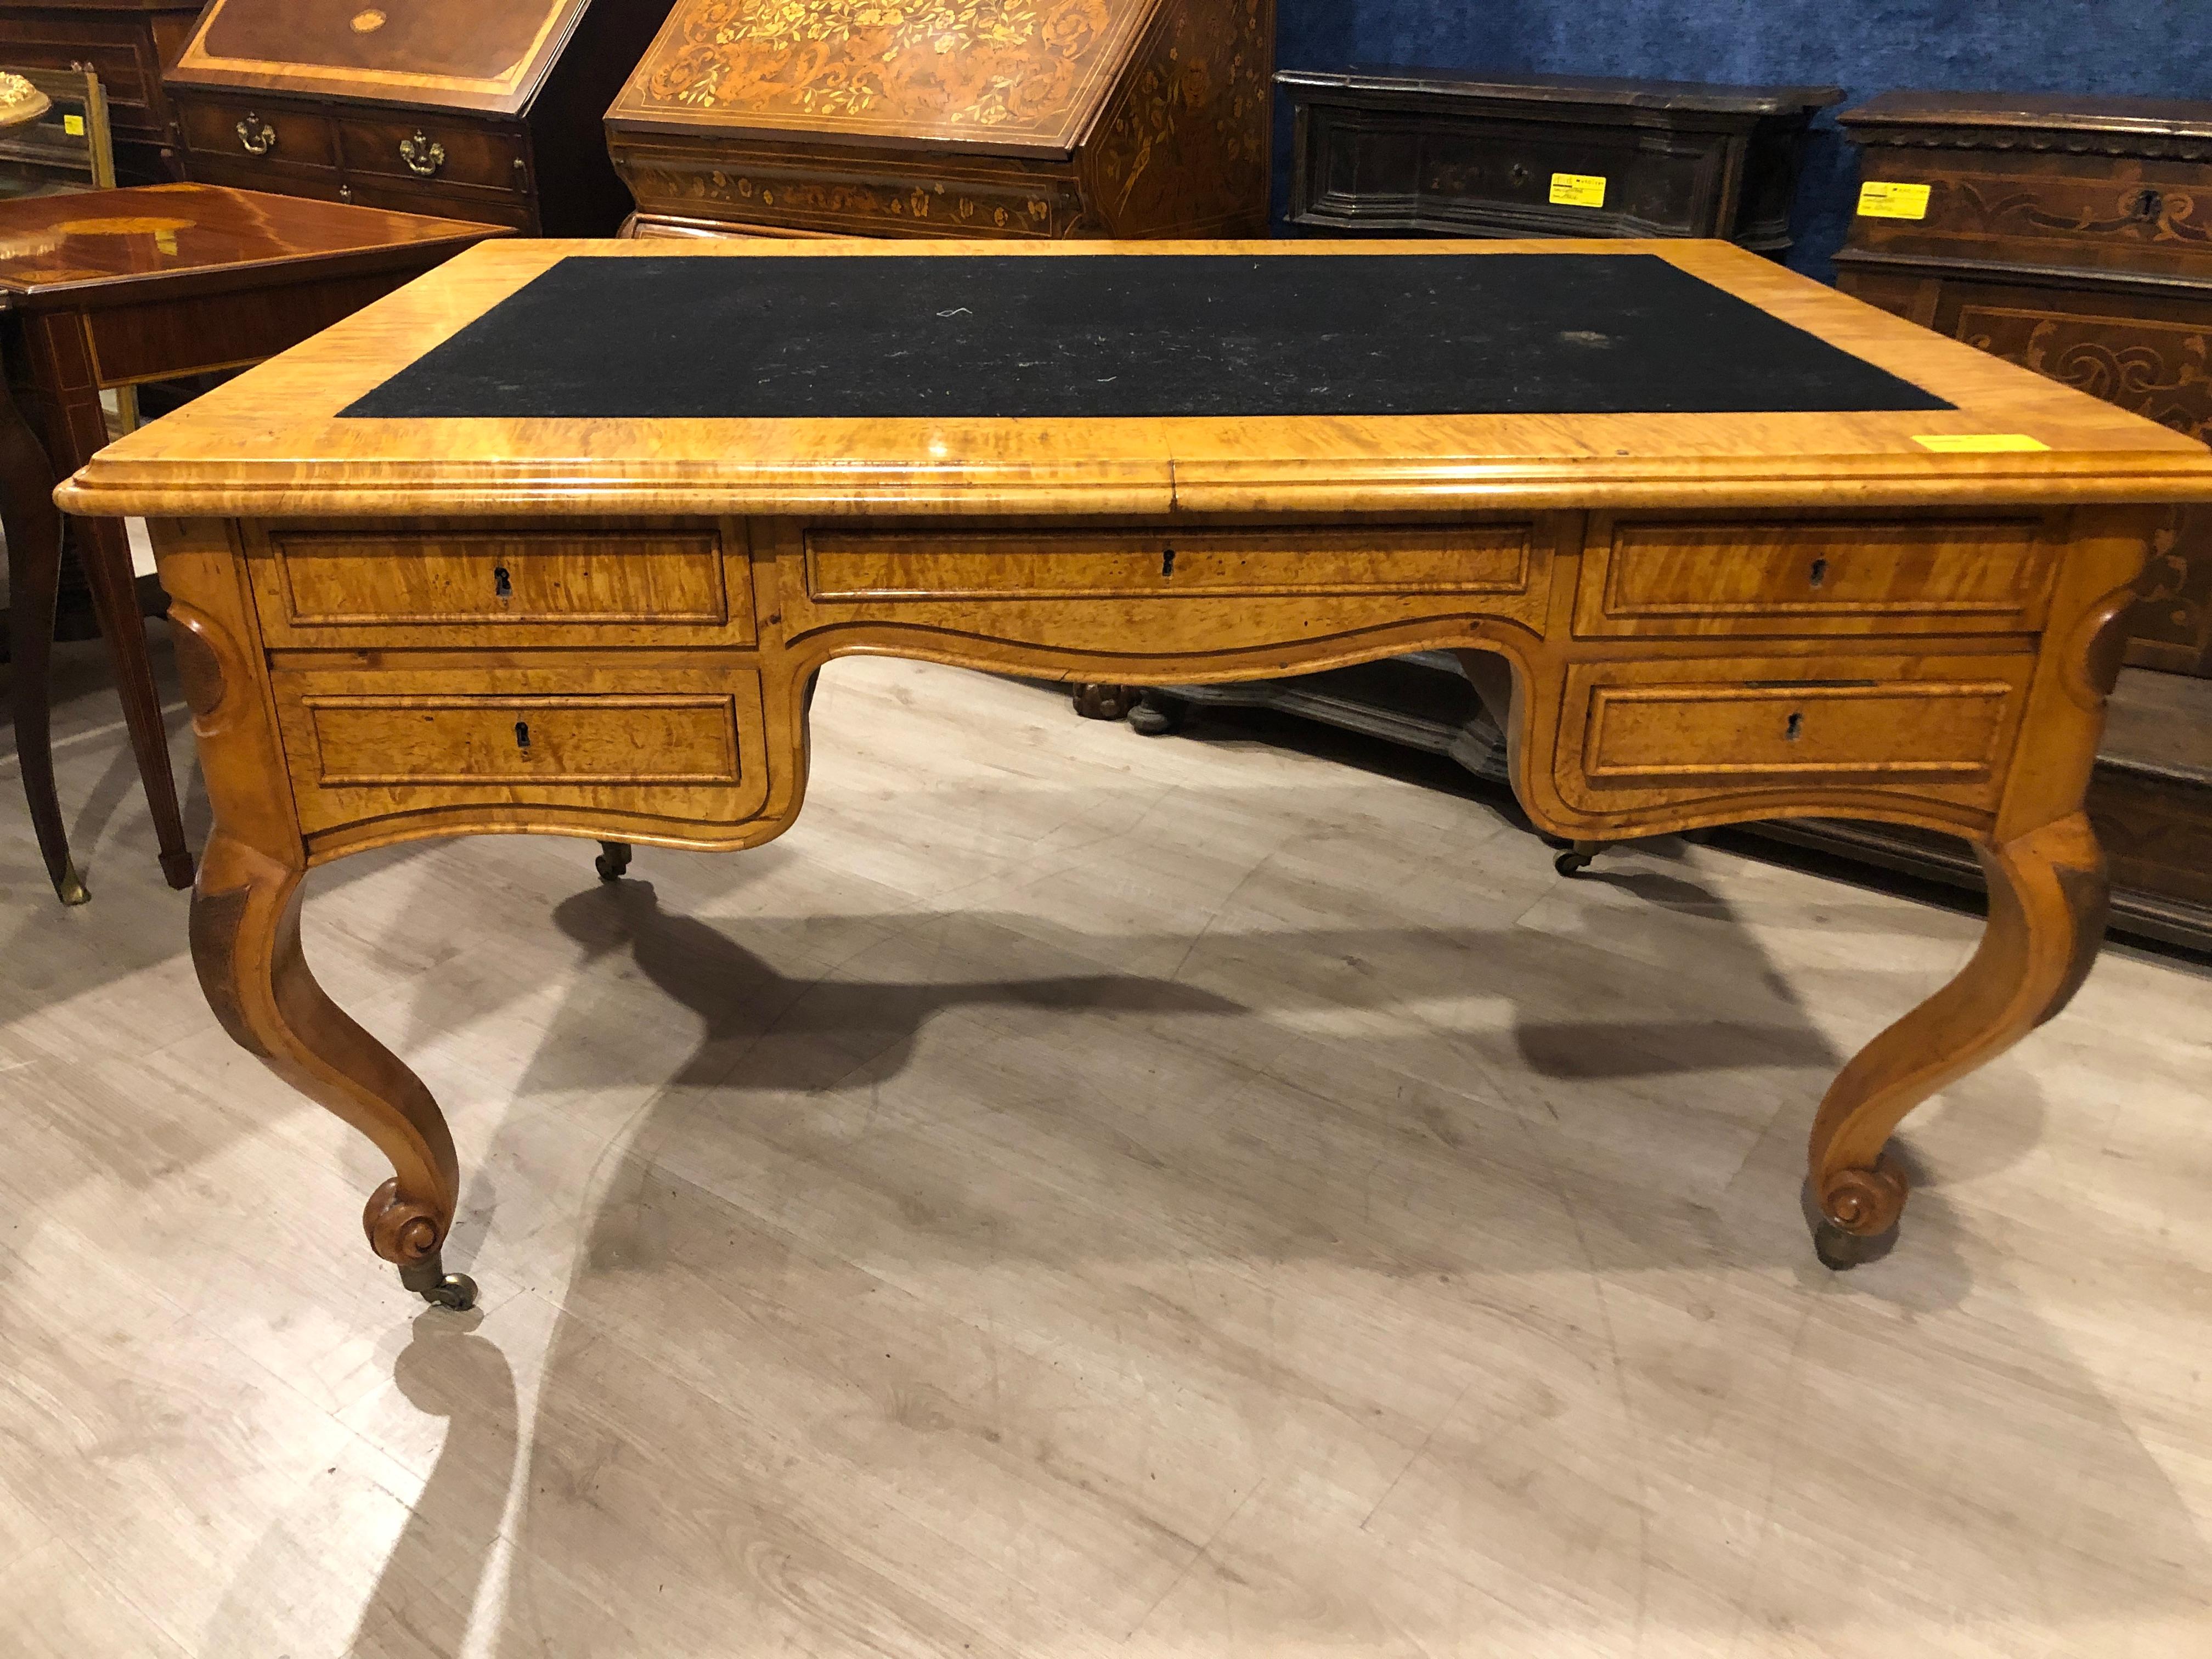 Biedermeier desk, Swedish, in Biedermeier style, circa 1860. Partner desk, 5 drawers on both sides, in birch wood and birch briar. An important desk, with this warm and sunny color, can be easily inserted both in a modern and in a Classic decor. In